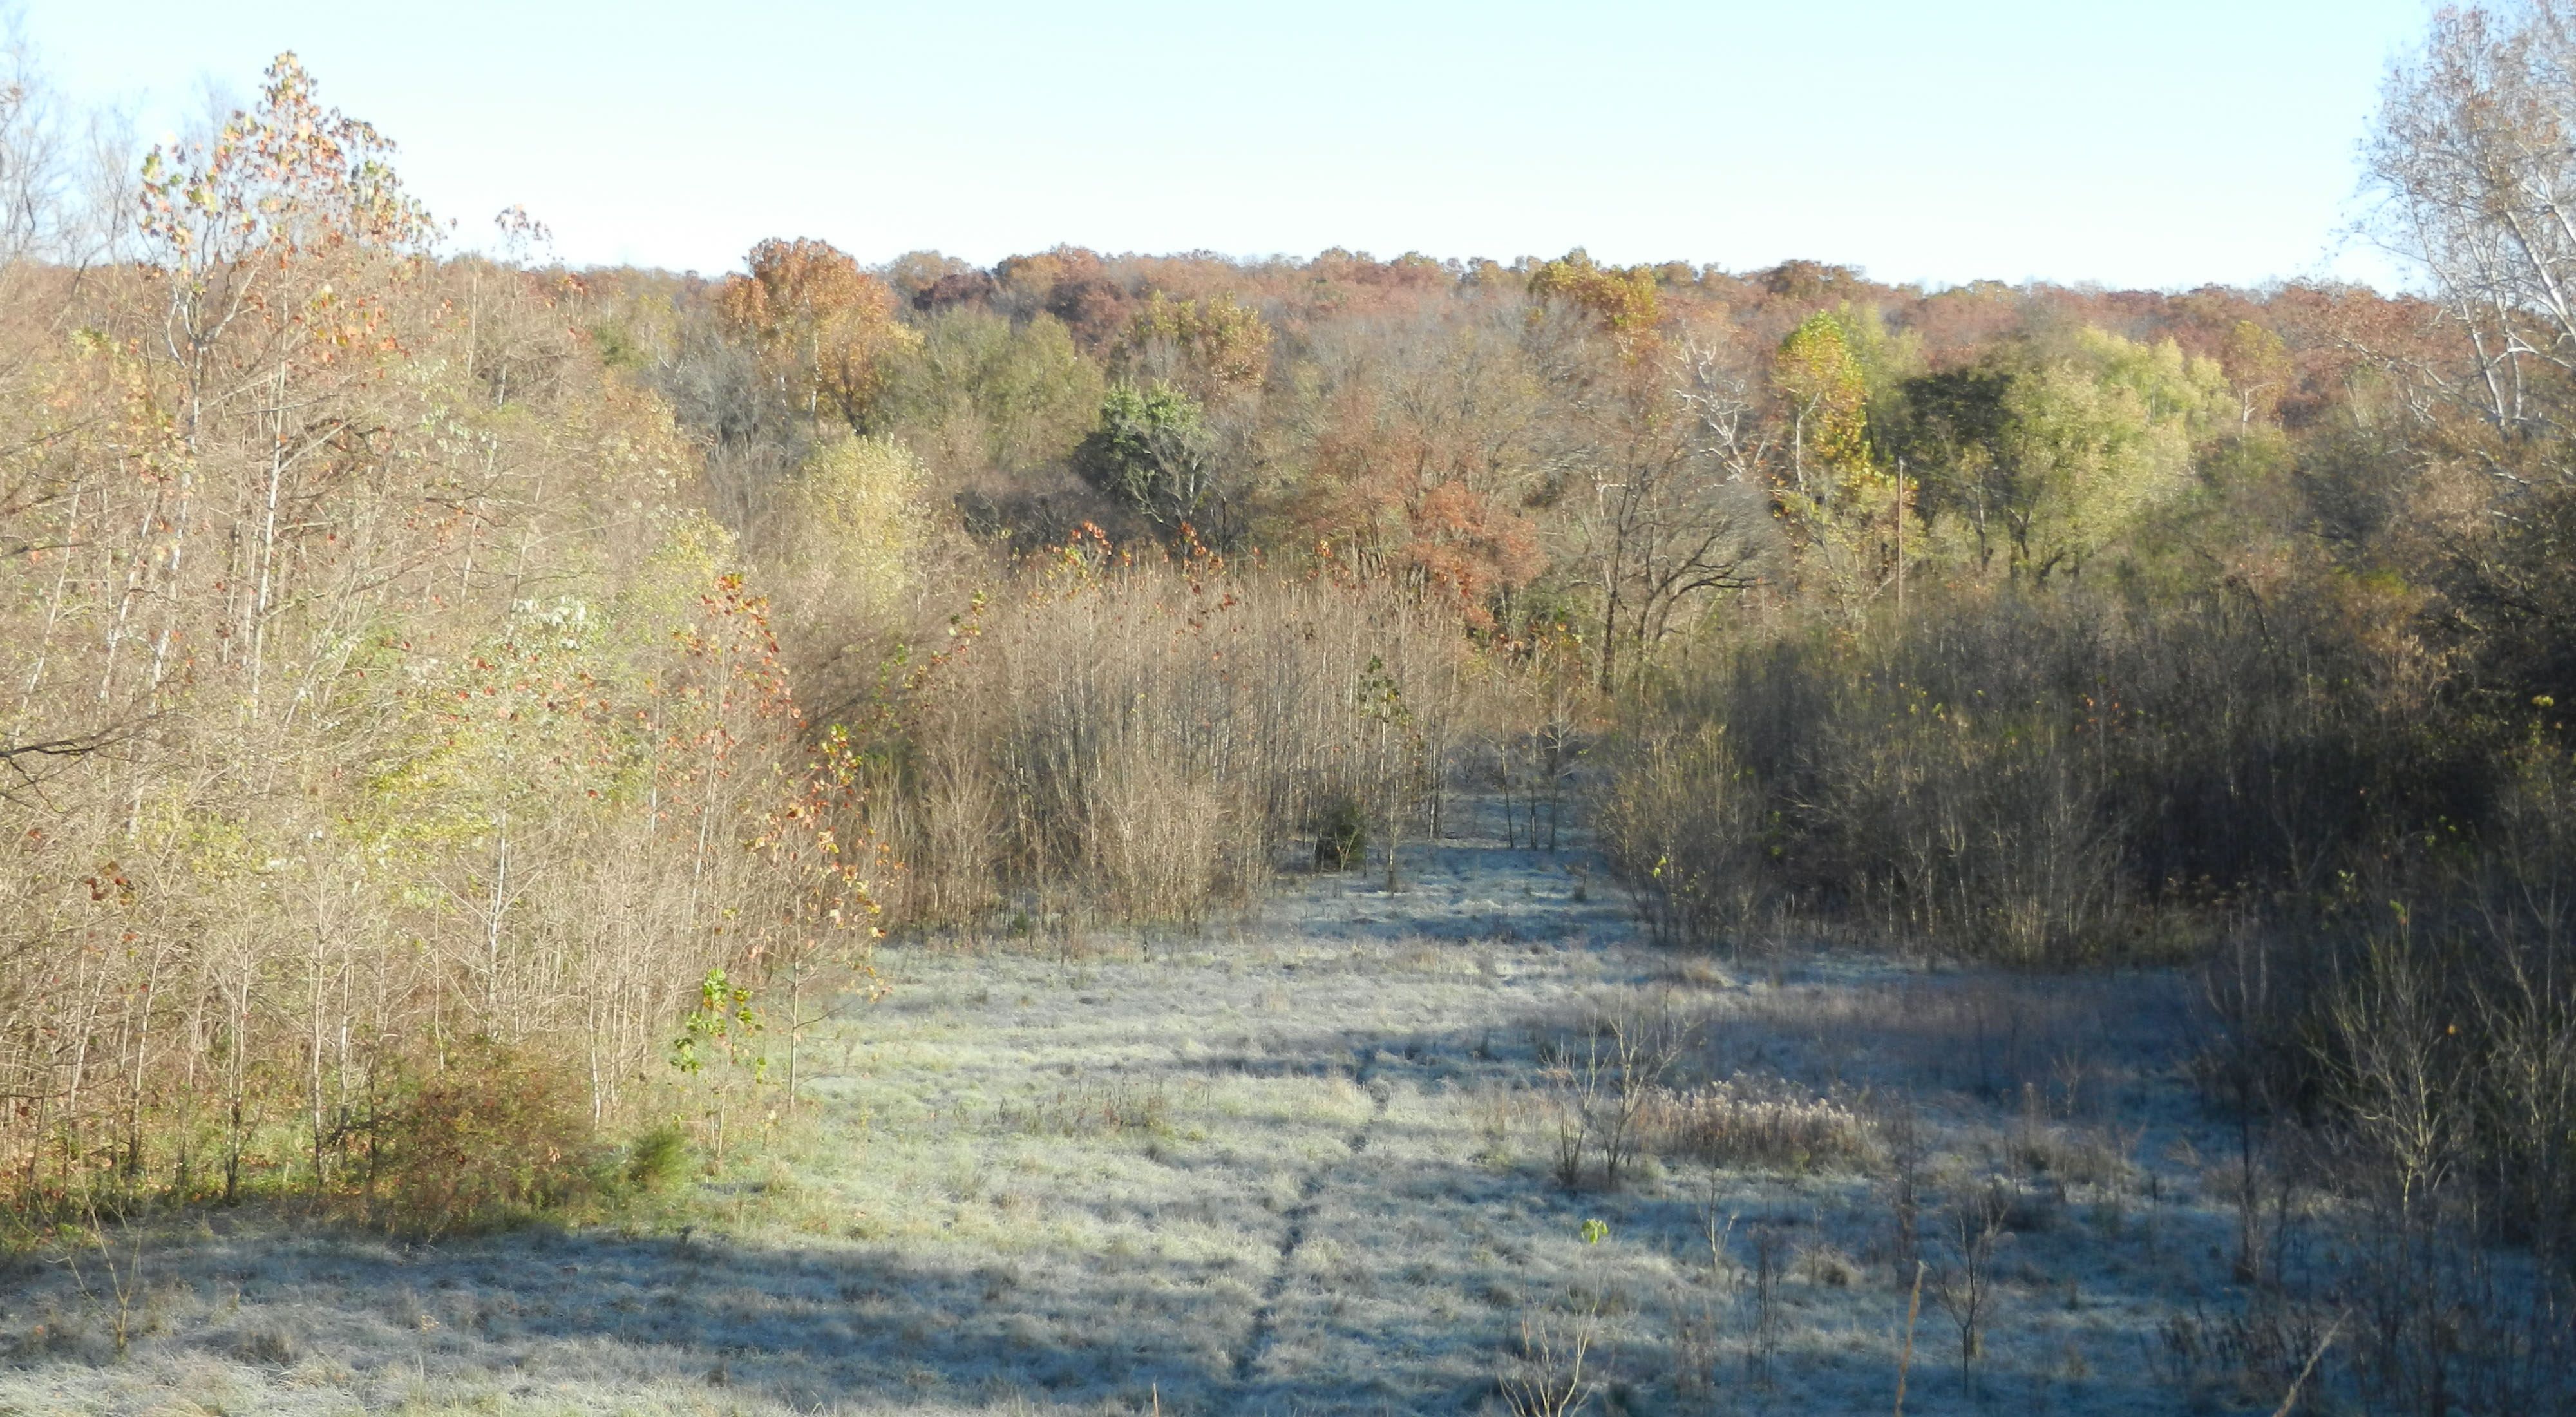 Zahorsky Woods offers numerous easy hiking trails with beautiful views of the area.